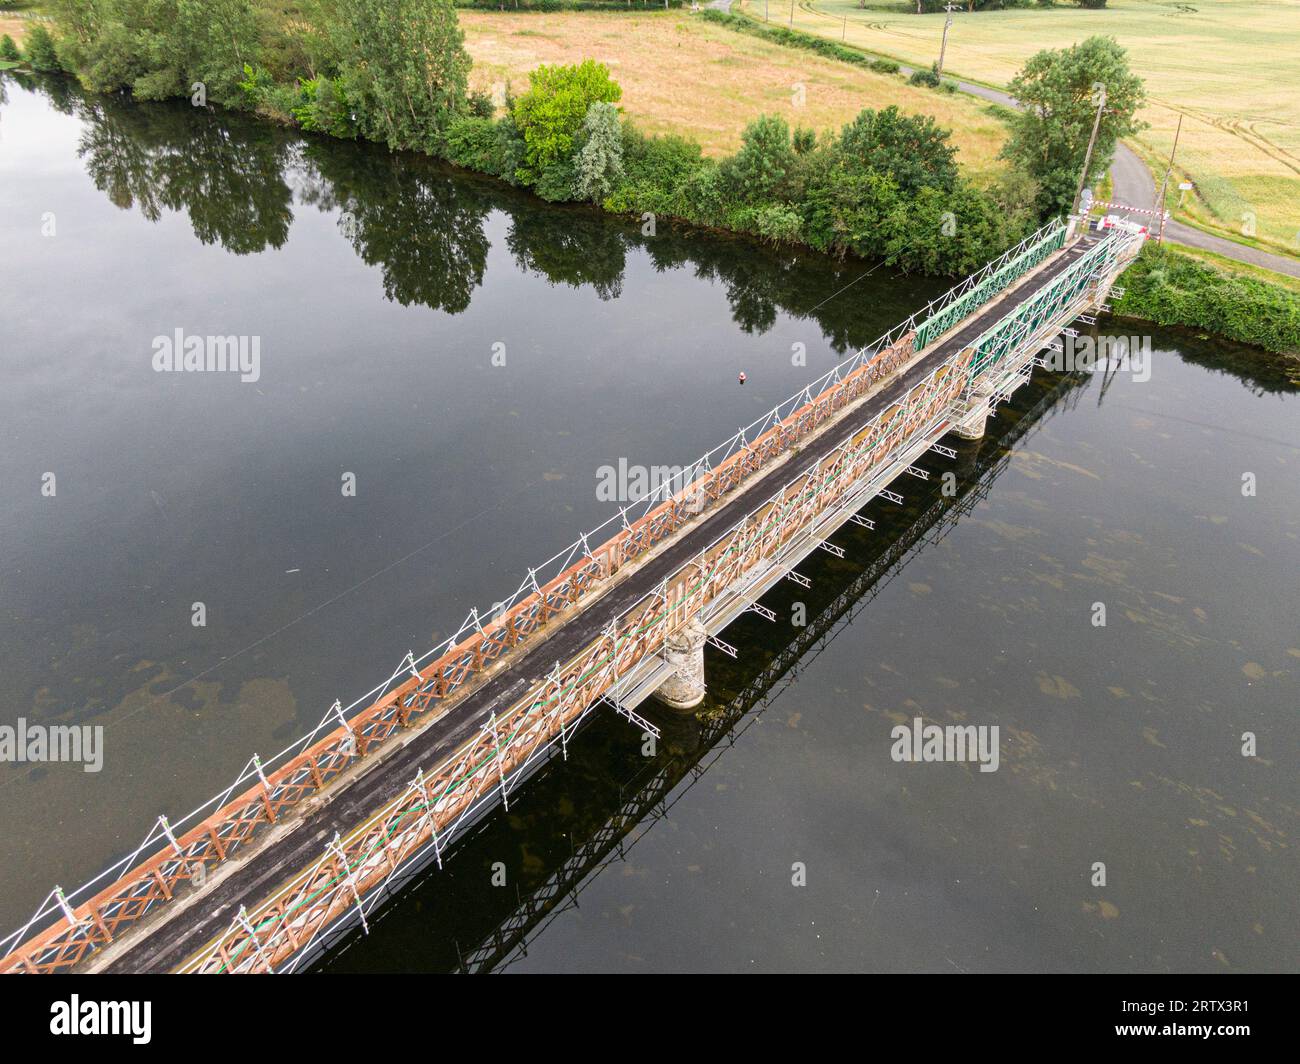 Scaffolding used for maintenance or restoration work on a small bridge over a large river the Cher Stock Photo